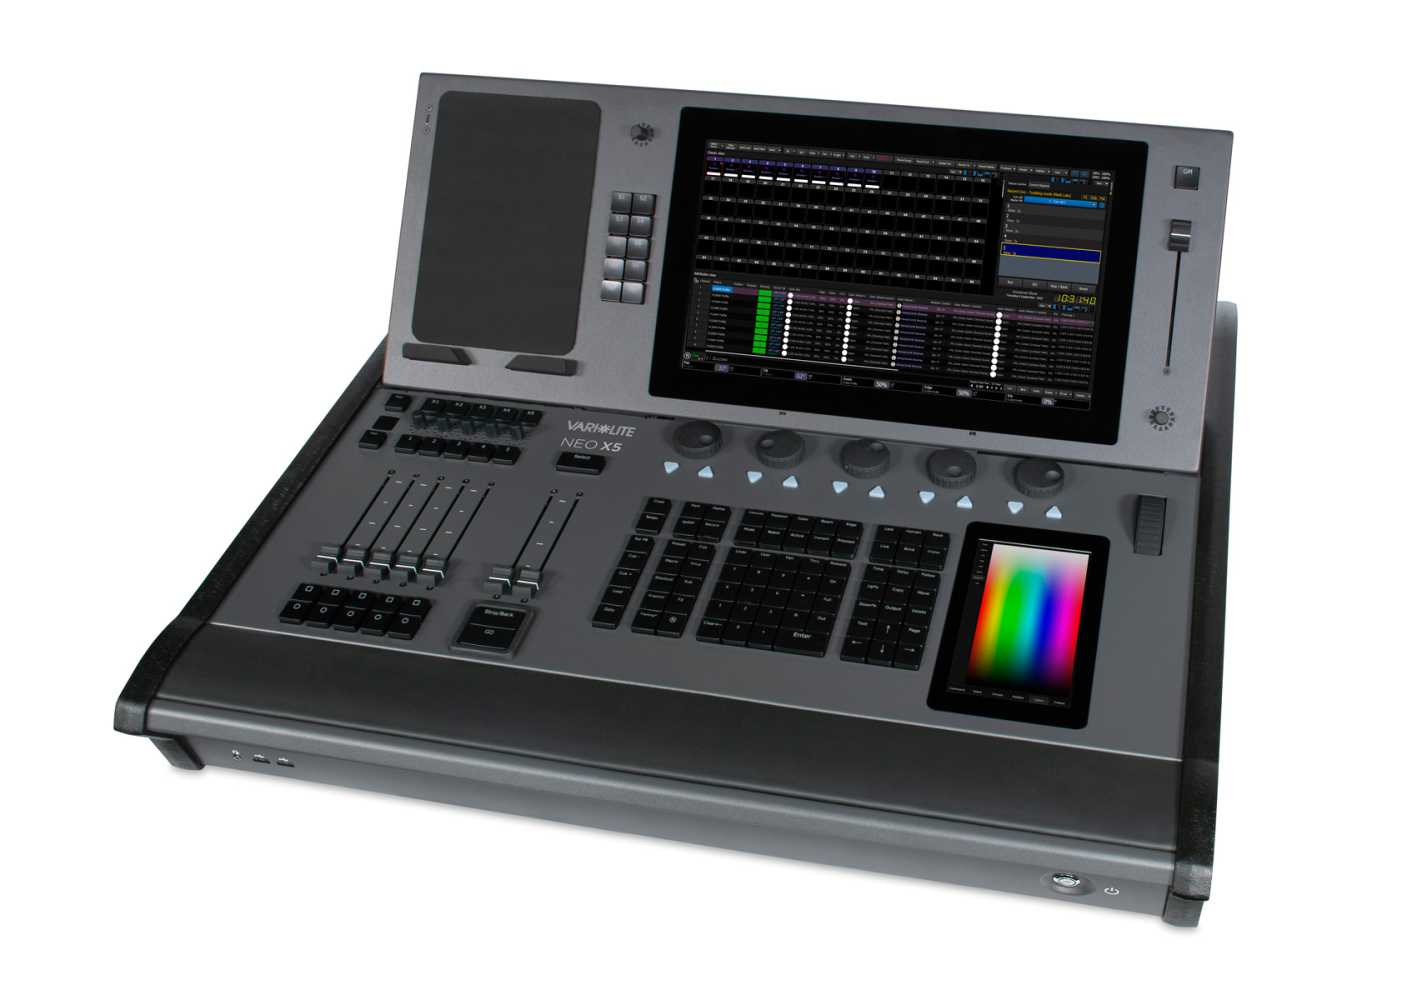 The Neo X5 is a high-performance lighting console running the powerful Neo platform